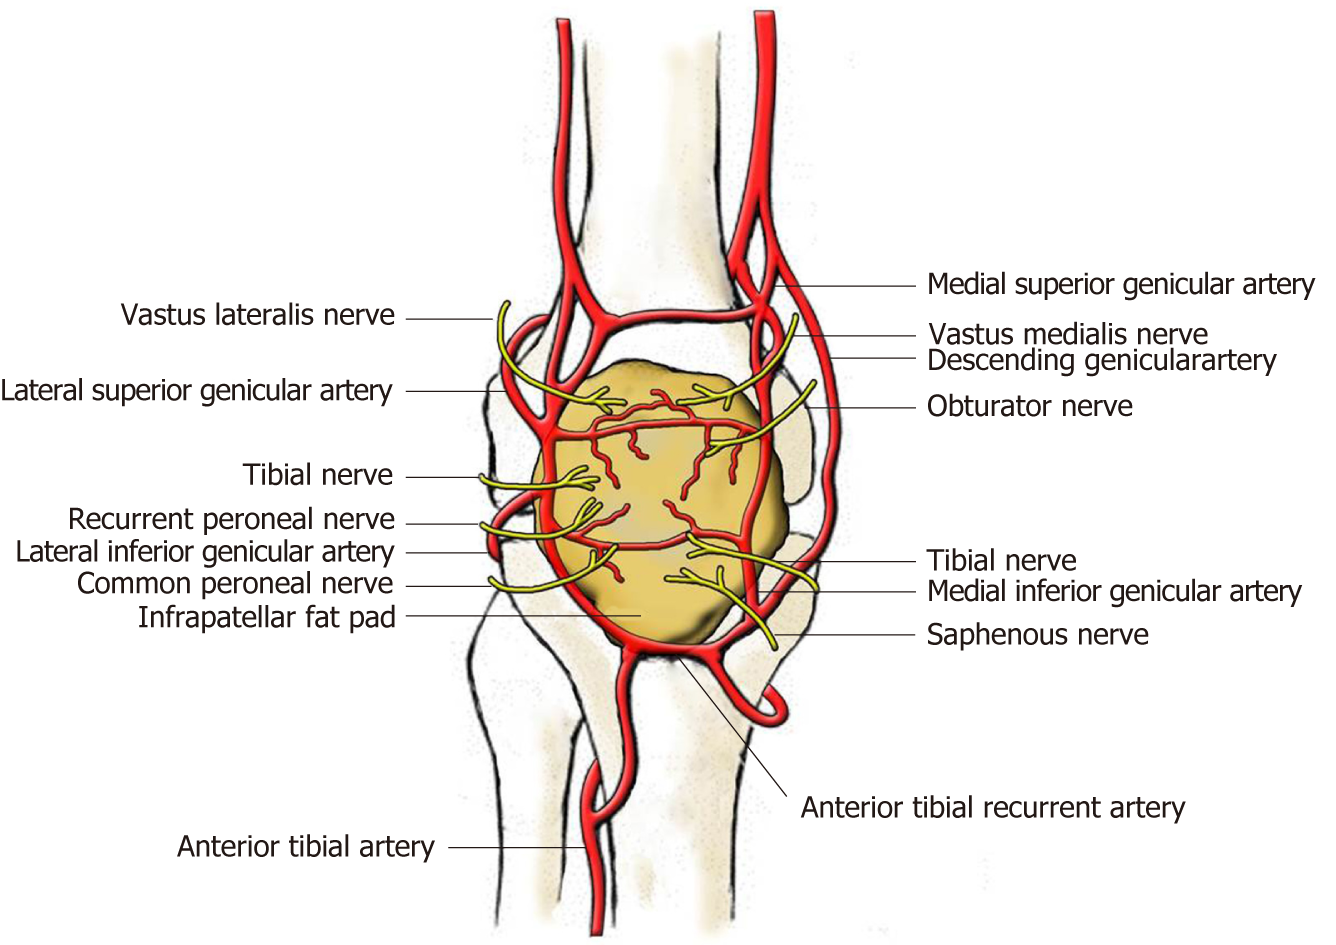 Role Of Infrapatellar Fat Pad In Pathological Process Of Knee